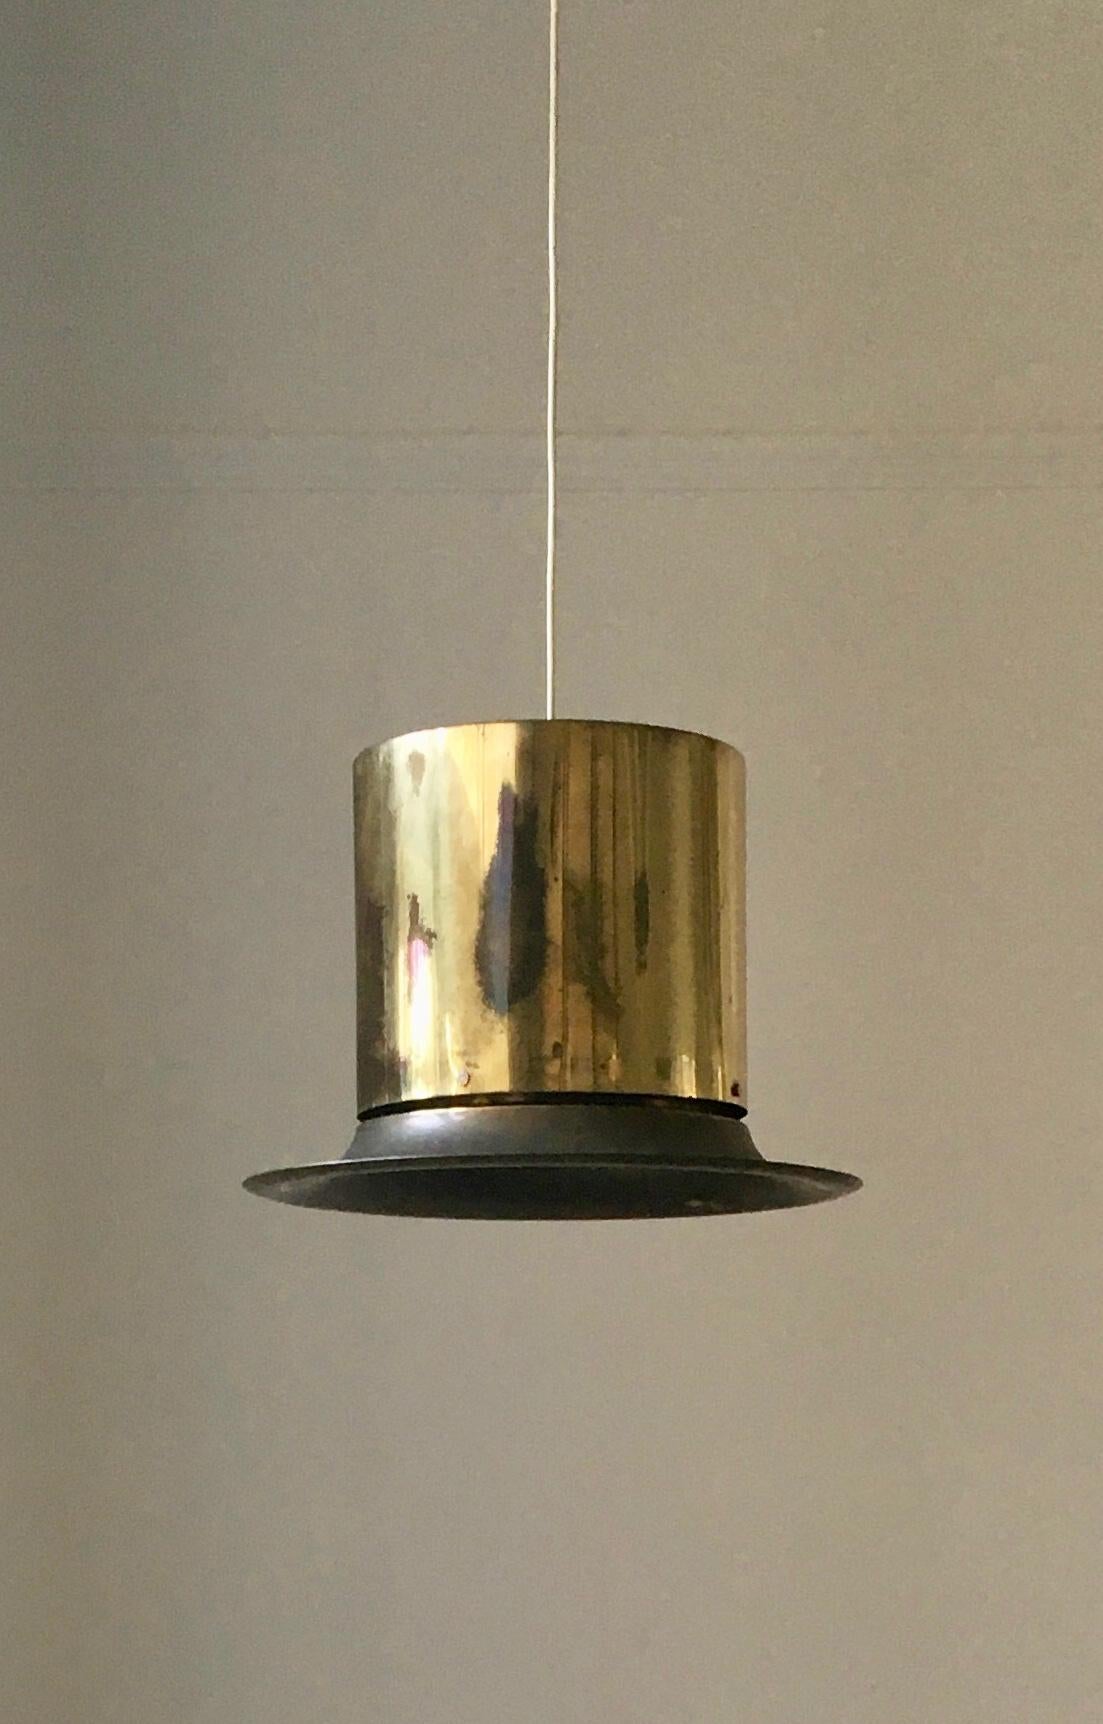 A brass pendant light by Hans-Agne Jakobsson for his company in Markaryd, Sweden, mid-20th century. An unusual and rarely seen piece of Nordic design. Labelled. 

The brass shade and original brass ceiling canopy are in good vintage condition,